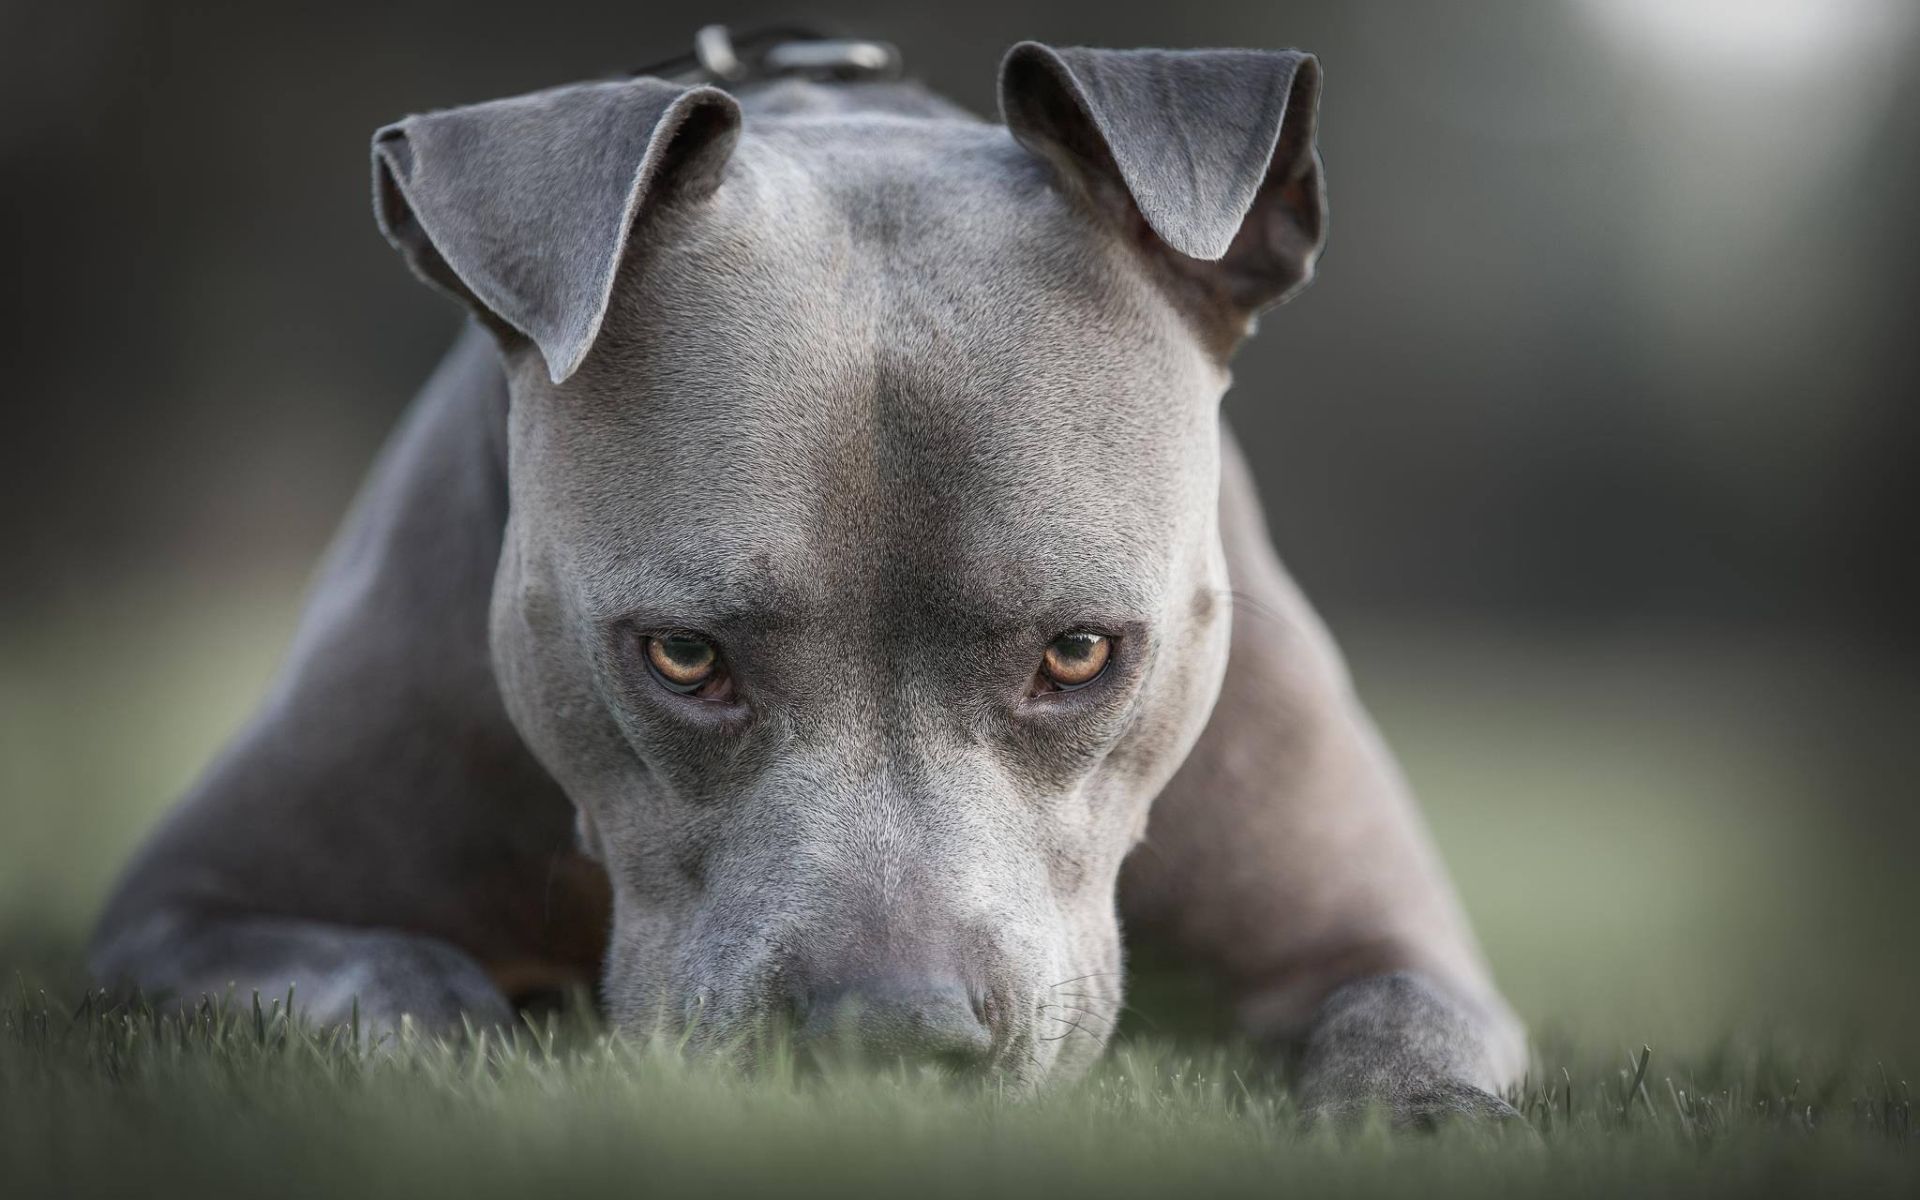 Download Wallpaper American Pit Bull Terrier, 4k, Close Up, Gray Pit Bull, Angry Dog, Pets, Dogs, Pit Bull Terrier, Funny Dogs, Pit Bull For Desktop With Resolution 1920x1200. High Quality HD Picture Wallpaper